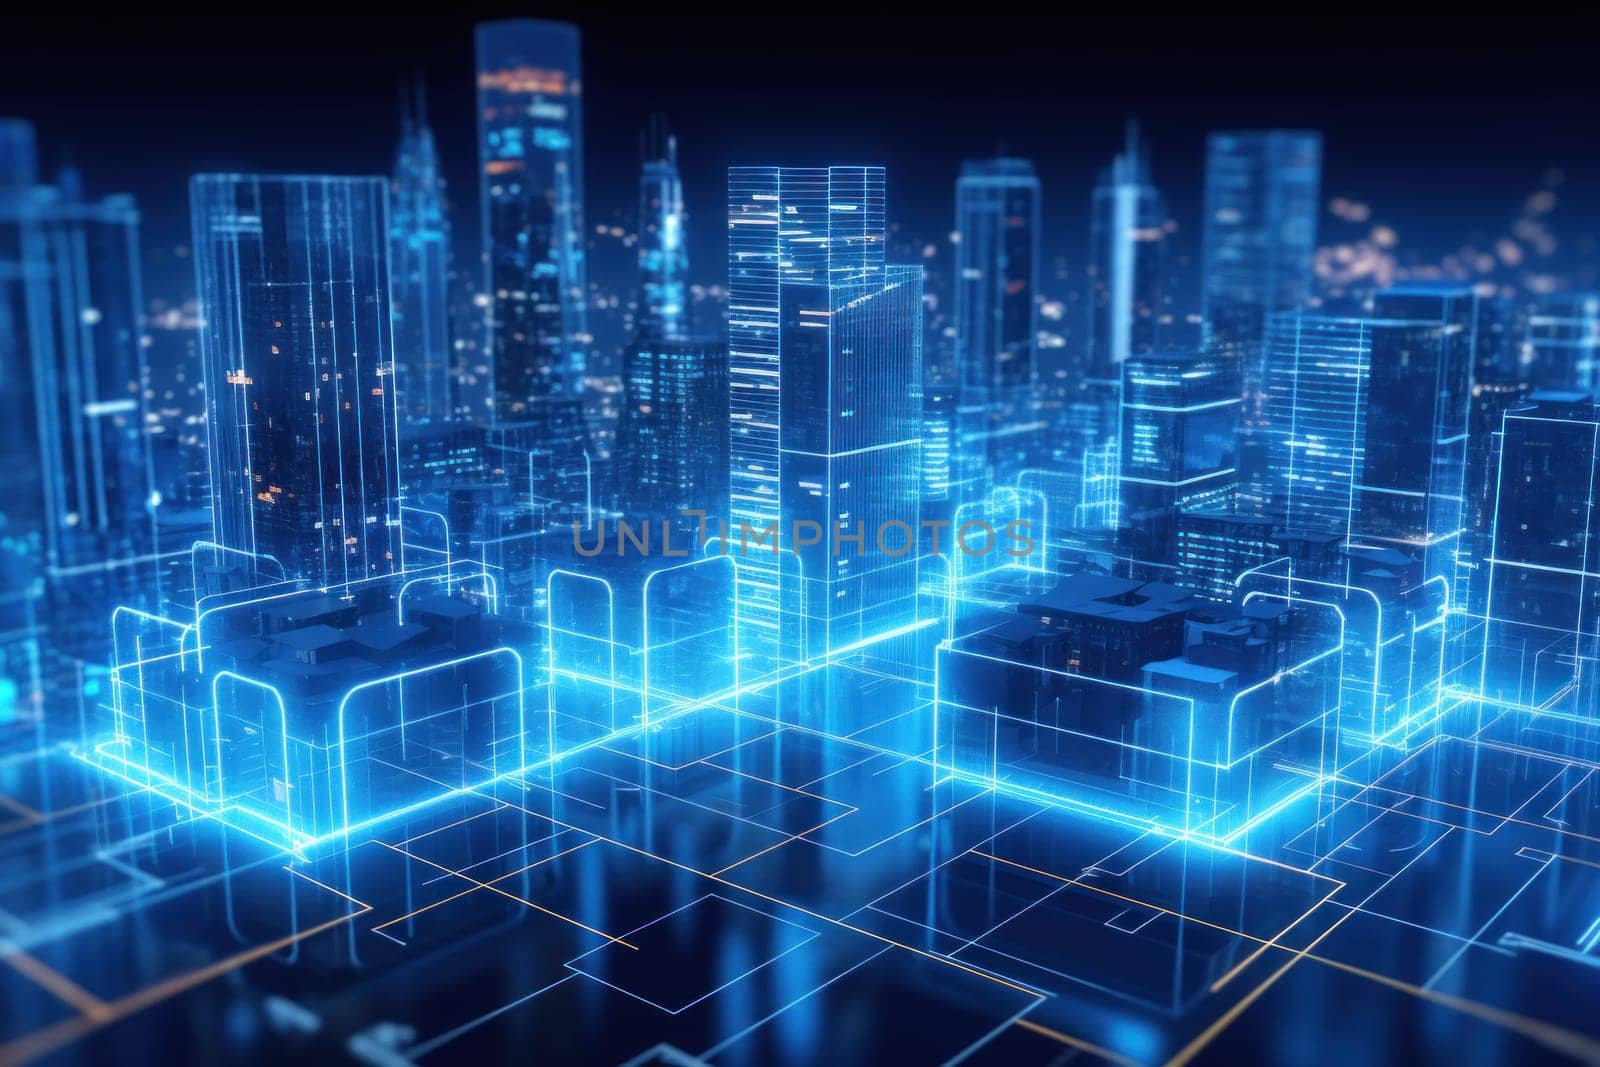 picture of modern city buildings with a blue light, in the style of data visualization.